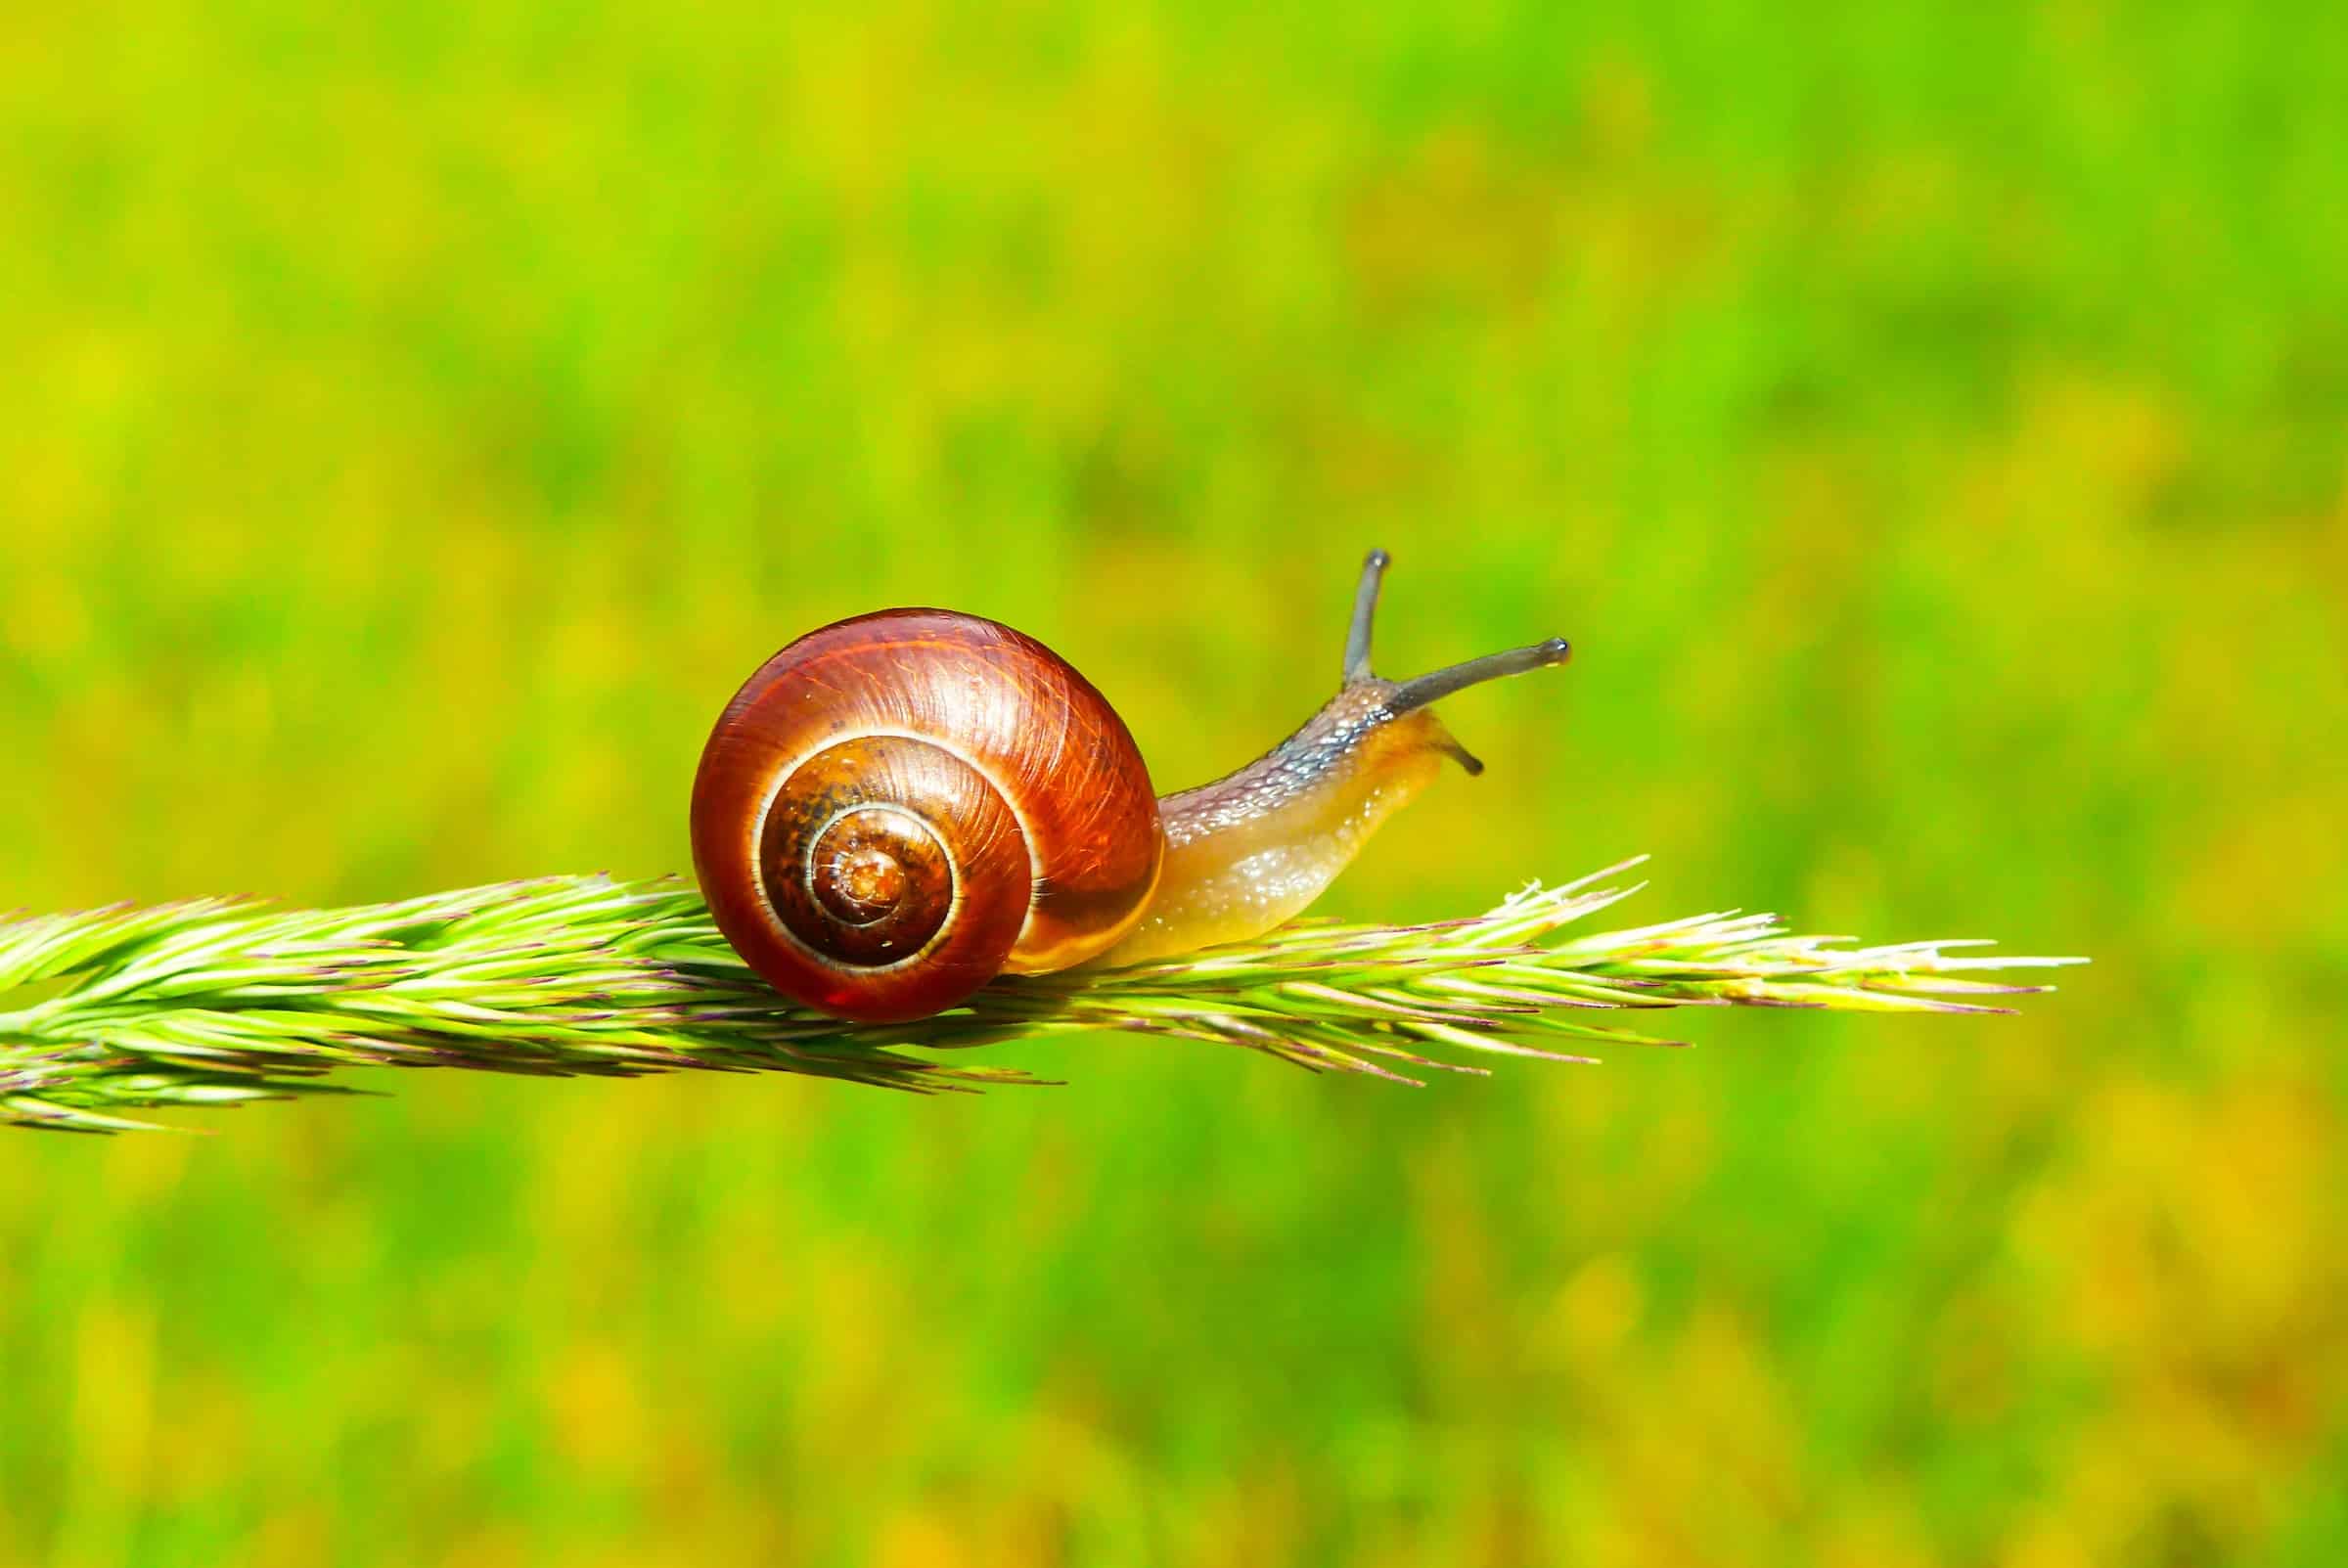 Why Are Snails And Slugs So Slow?